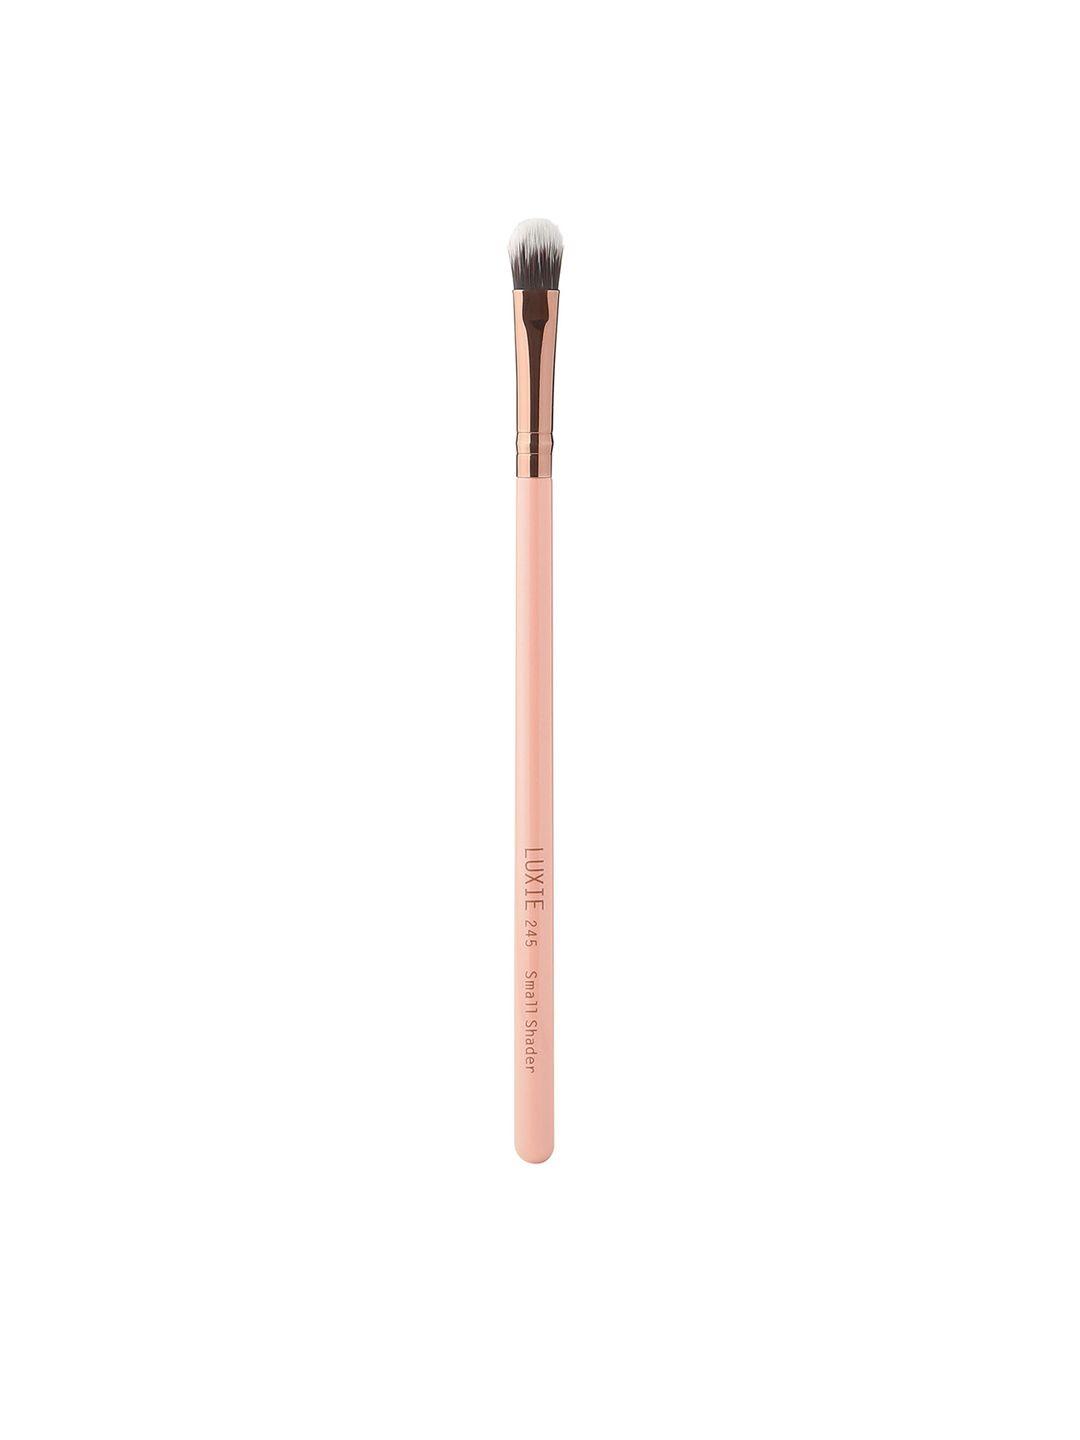 luxie rose gold small shader brush - 245